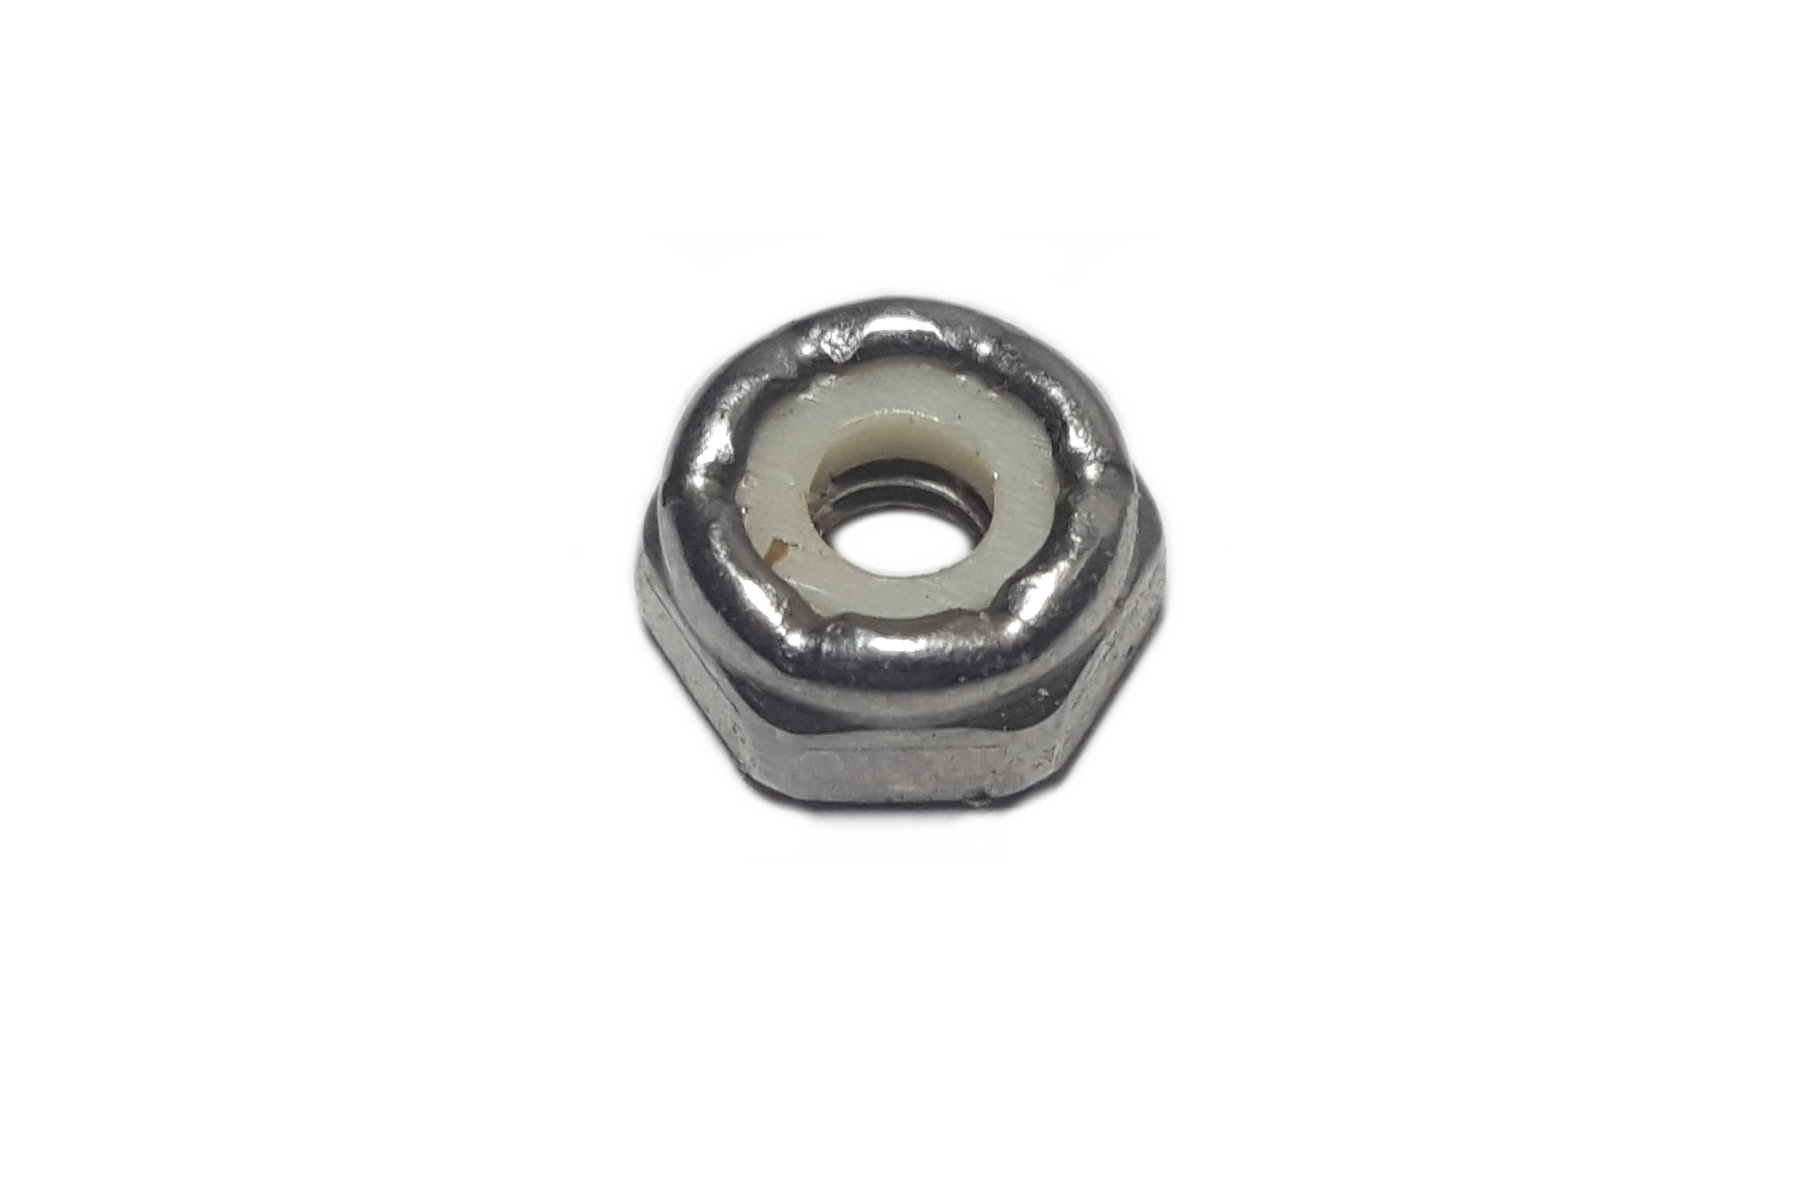  8-32 Thin Lock Nut. Part number SHW-160